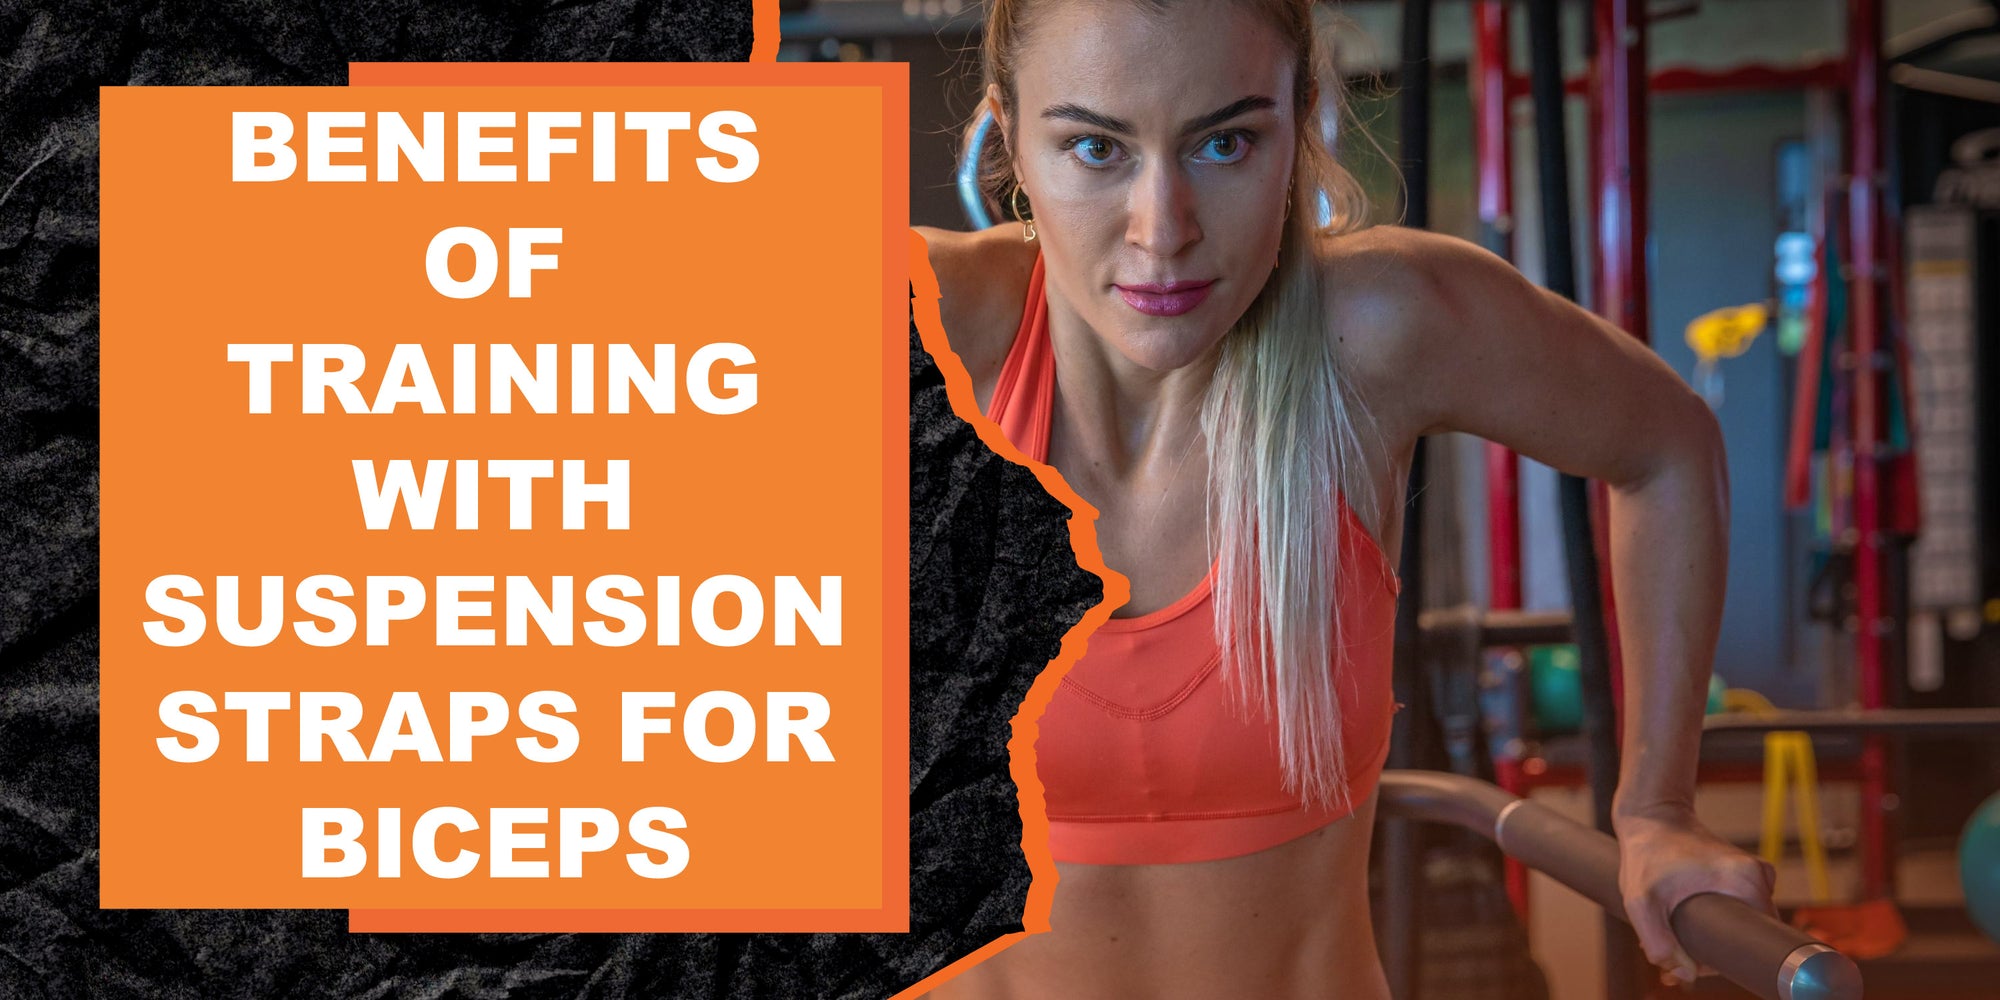 The Benefits of Training with Suspension Straps for Bicep Development